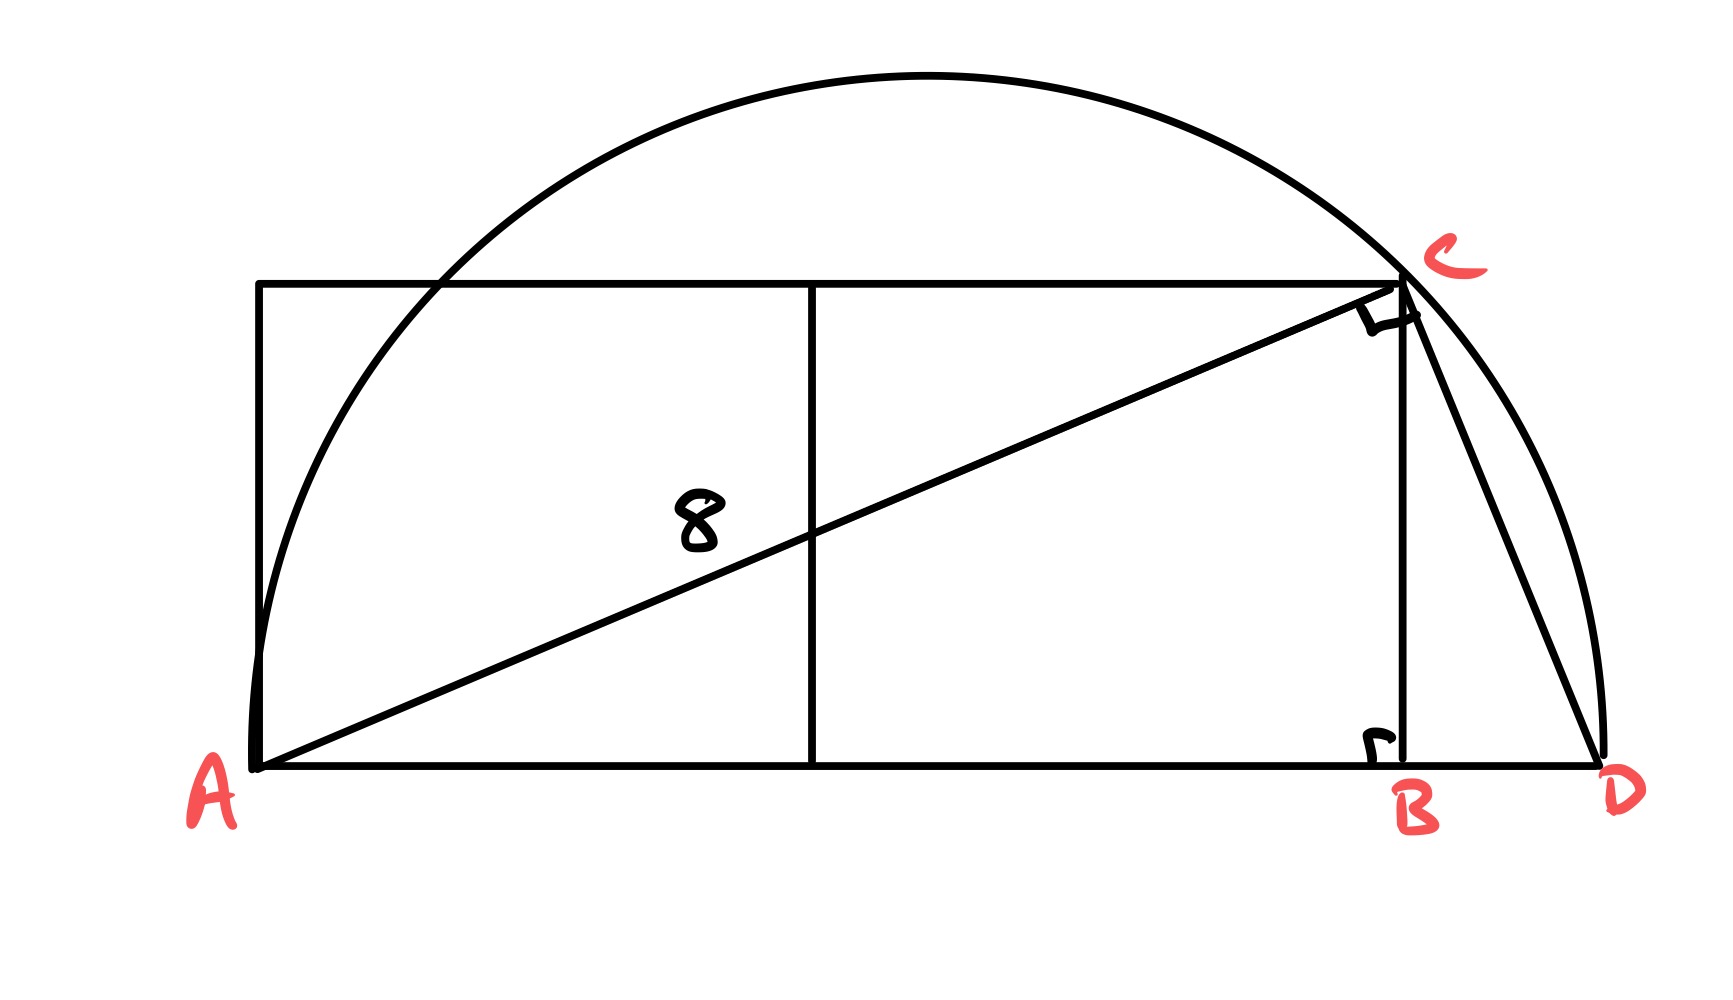 Four squares in a semi-circle with two squares